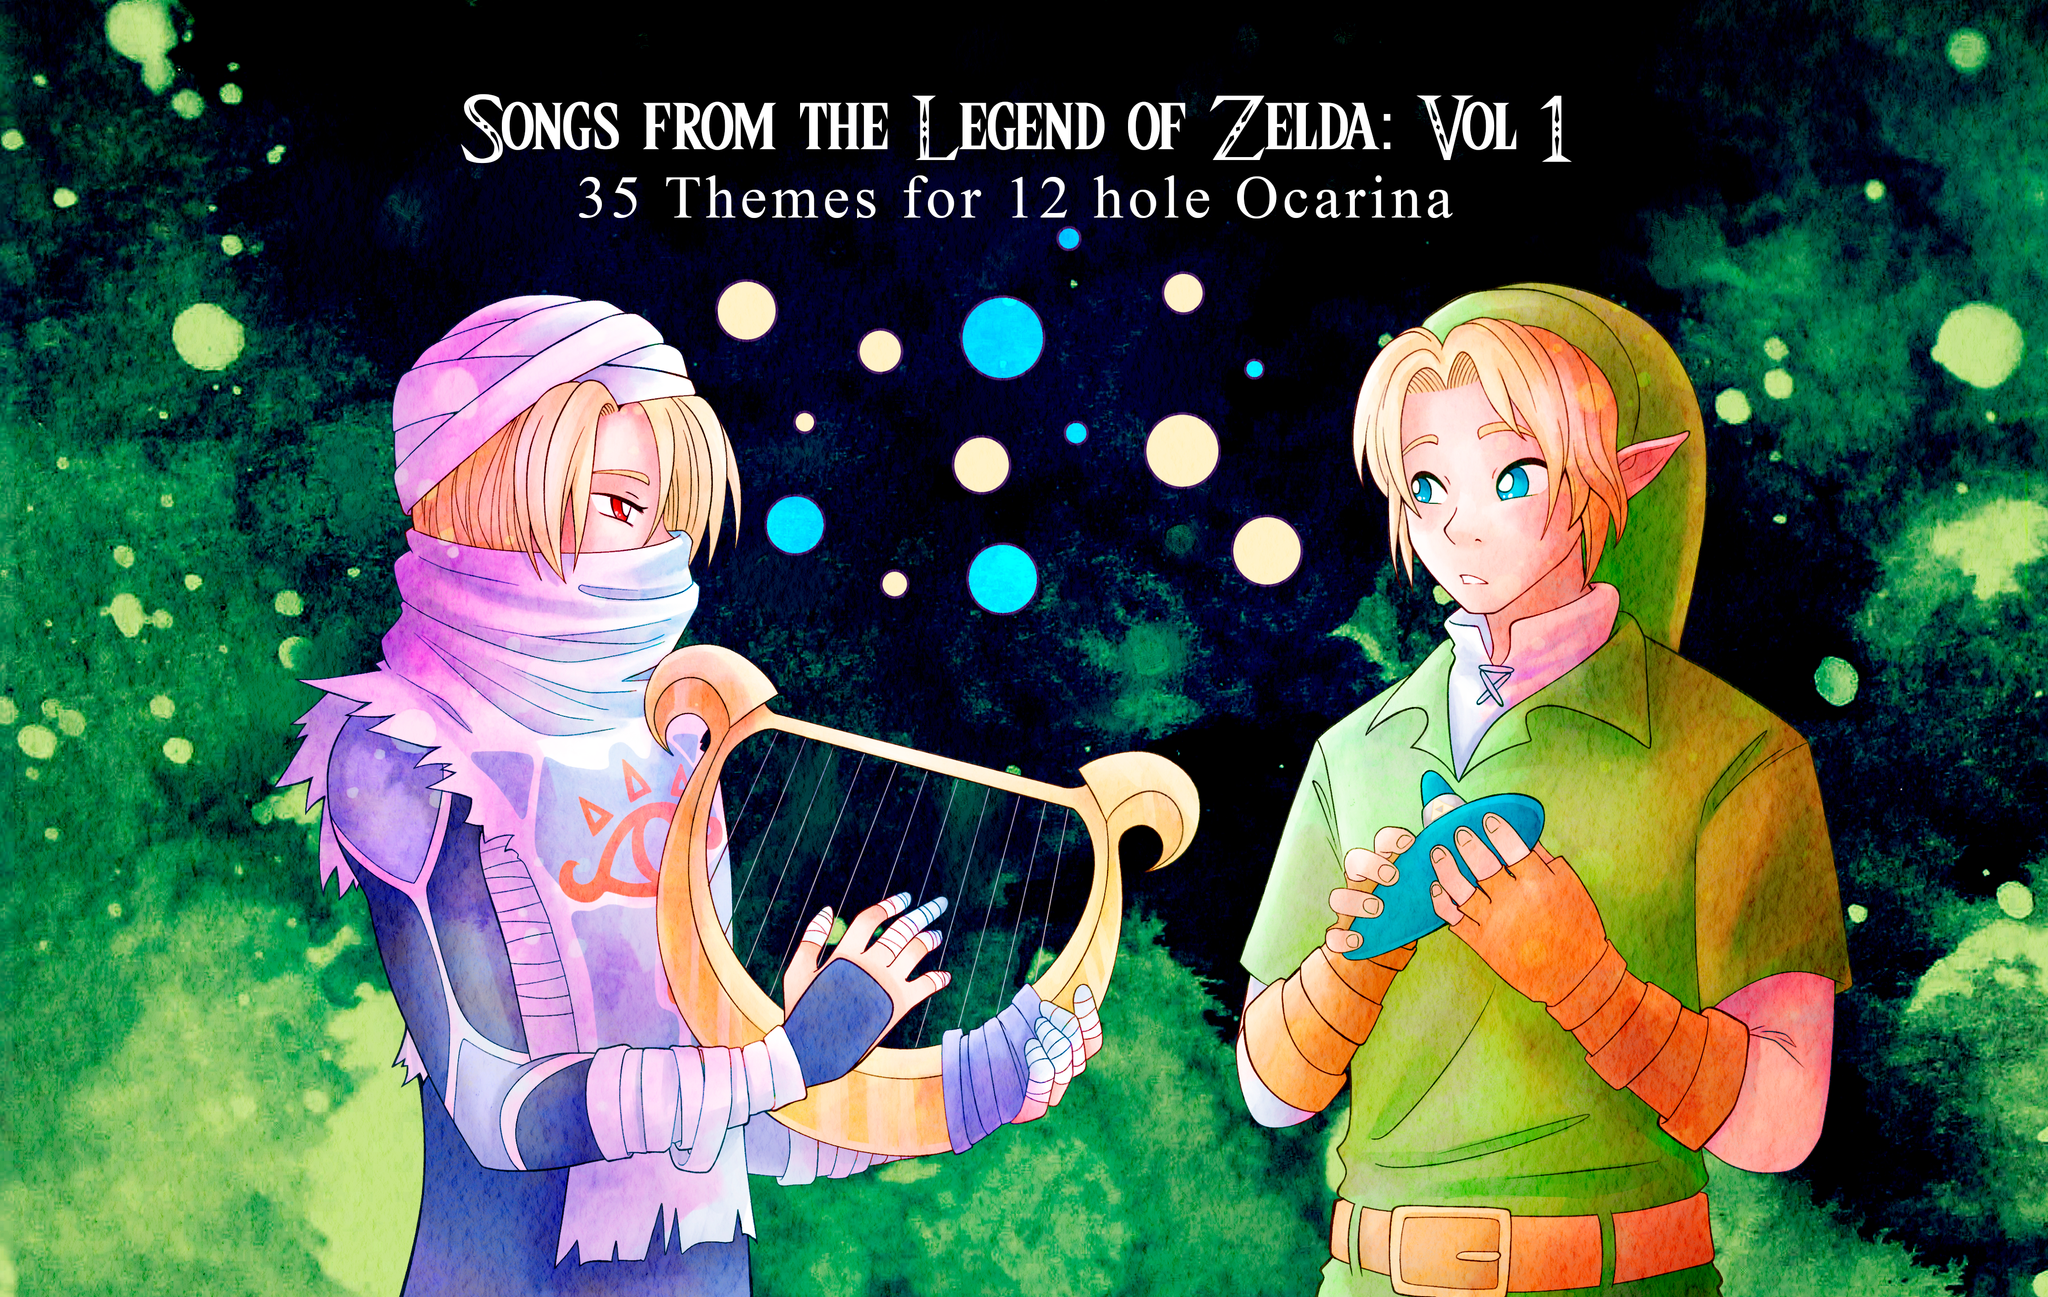 The Legend of Zelda:Ocarine of Time-Sun's song 